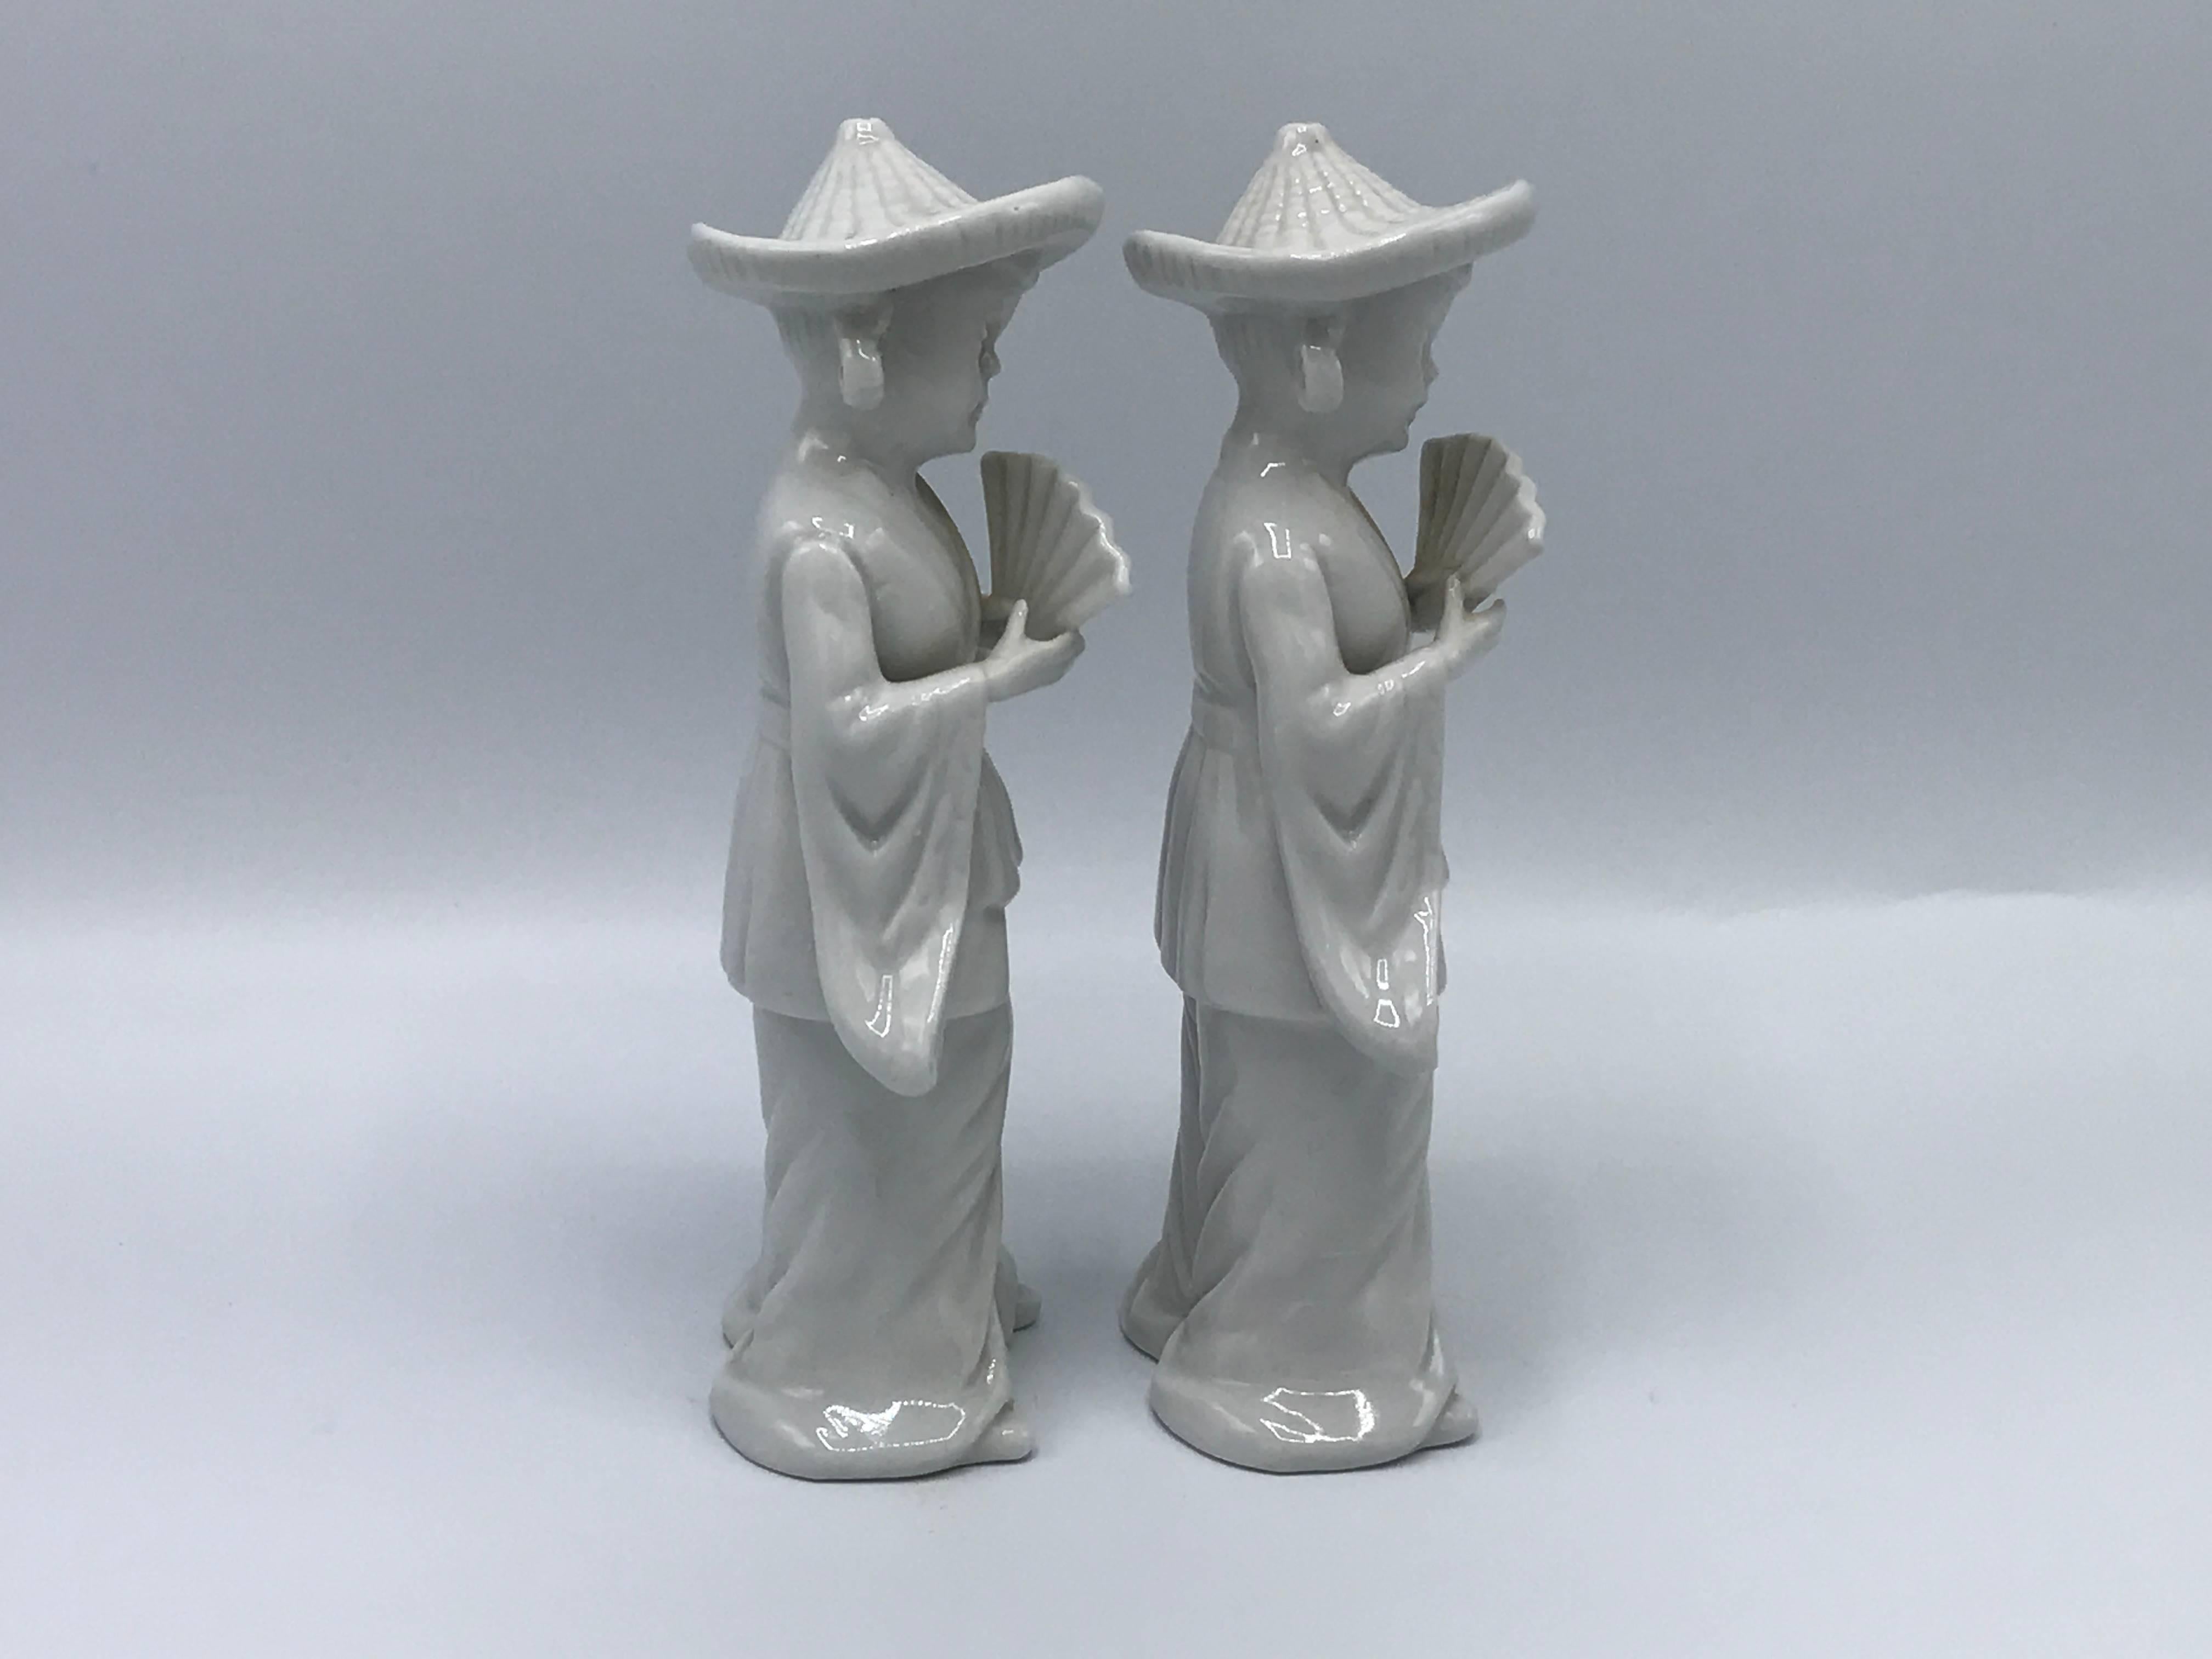 Offered is a gorgeous, pair of 1950s Blanc de Chine, Asian Geisha statues.